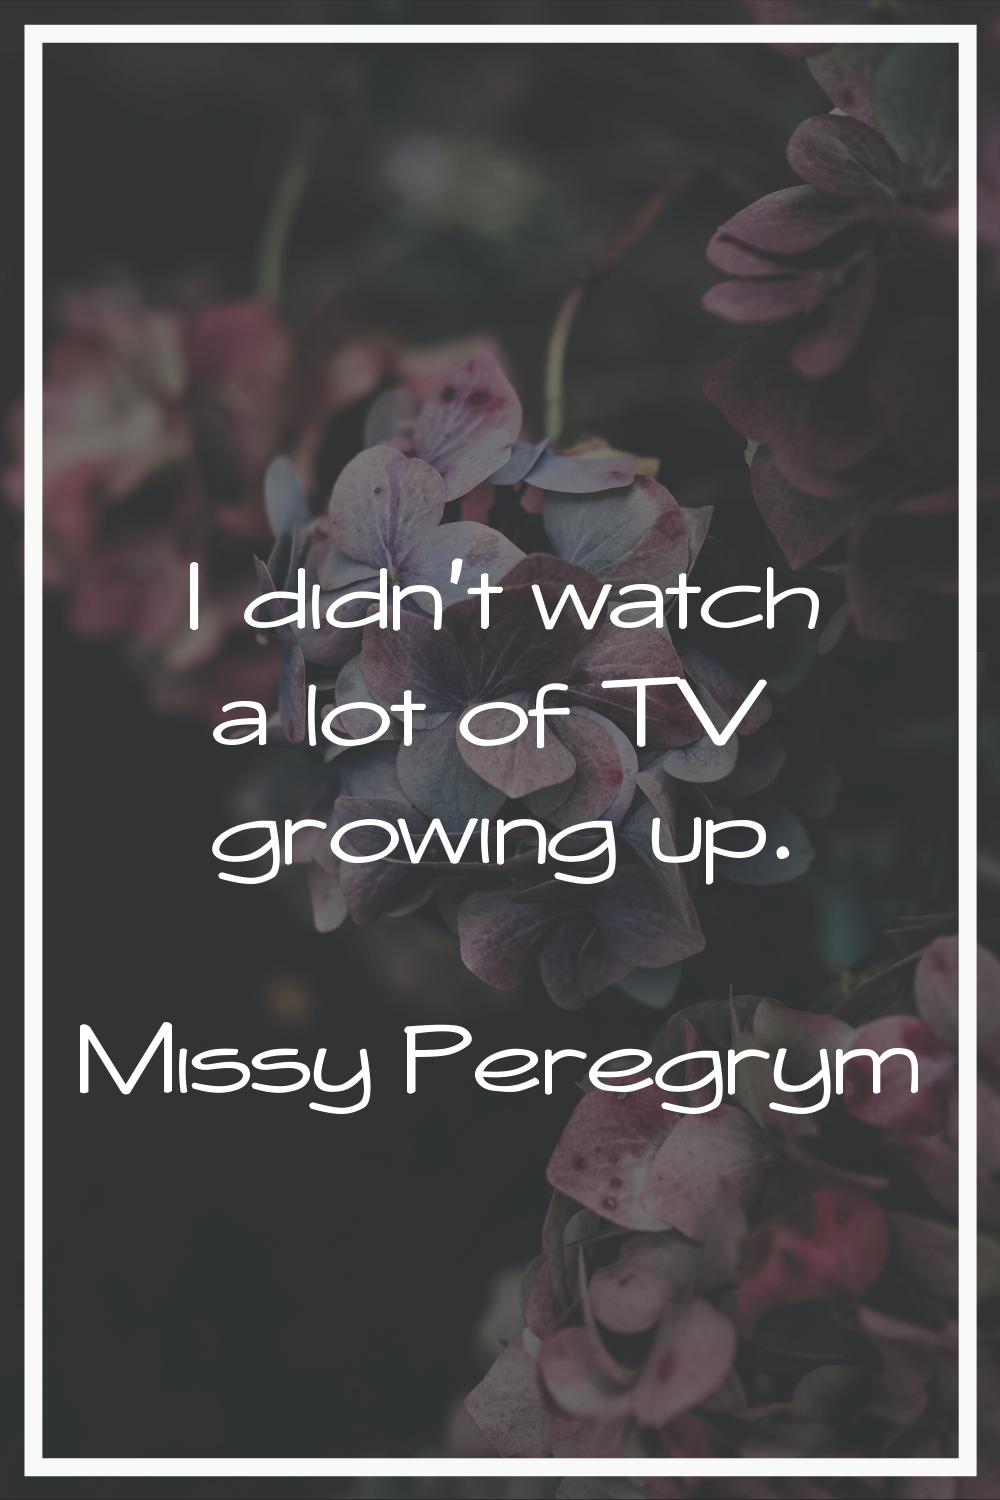 I didn't watch a lot of TV growing up.